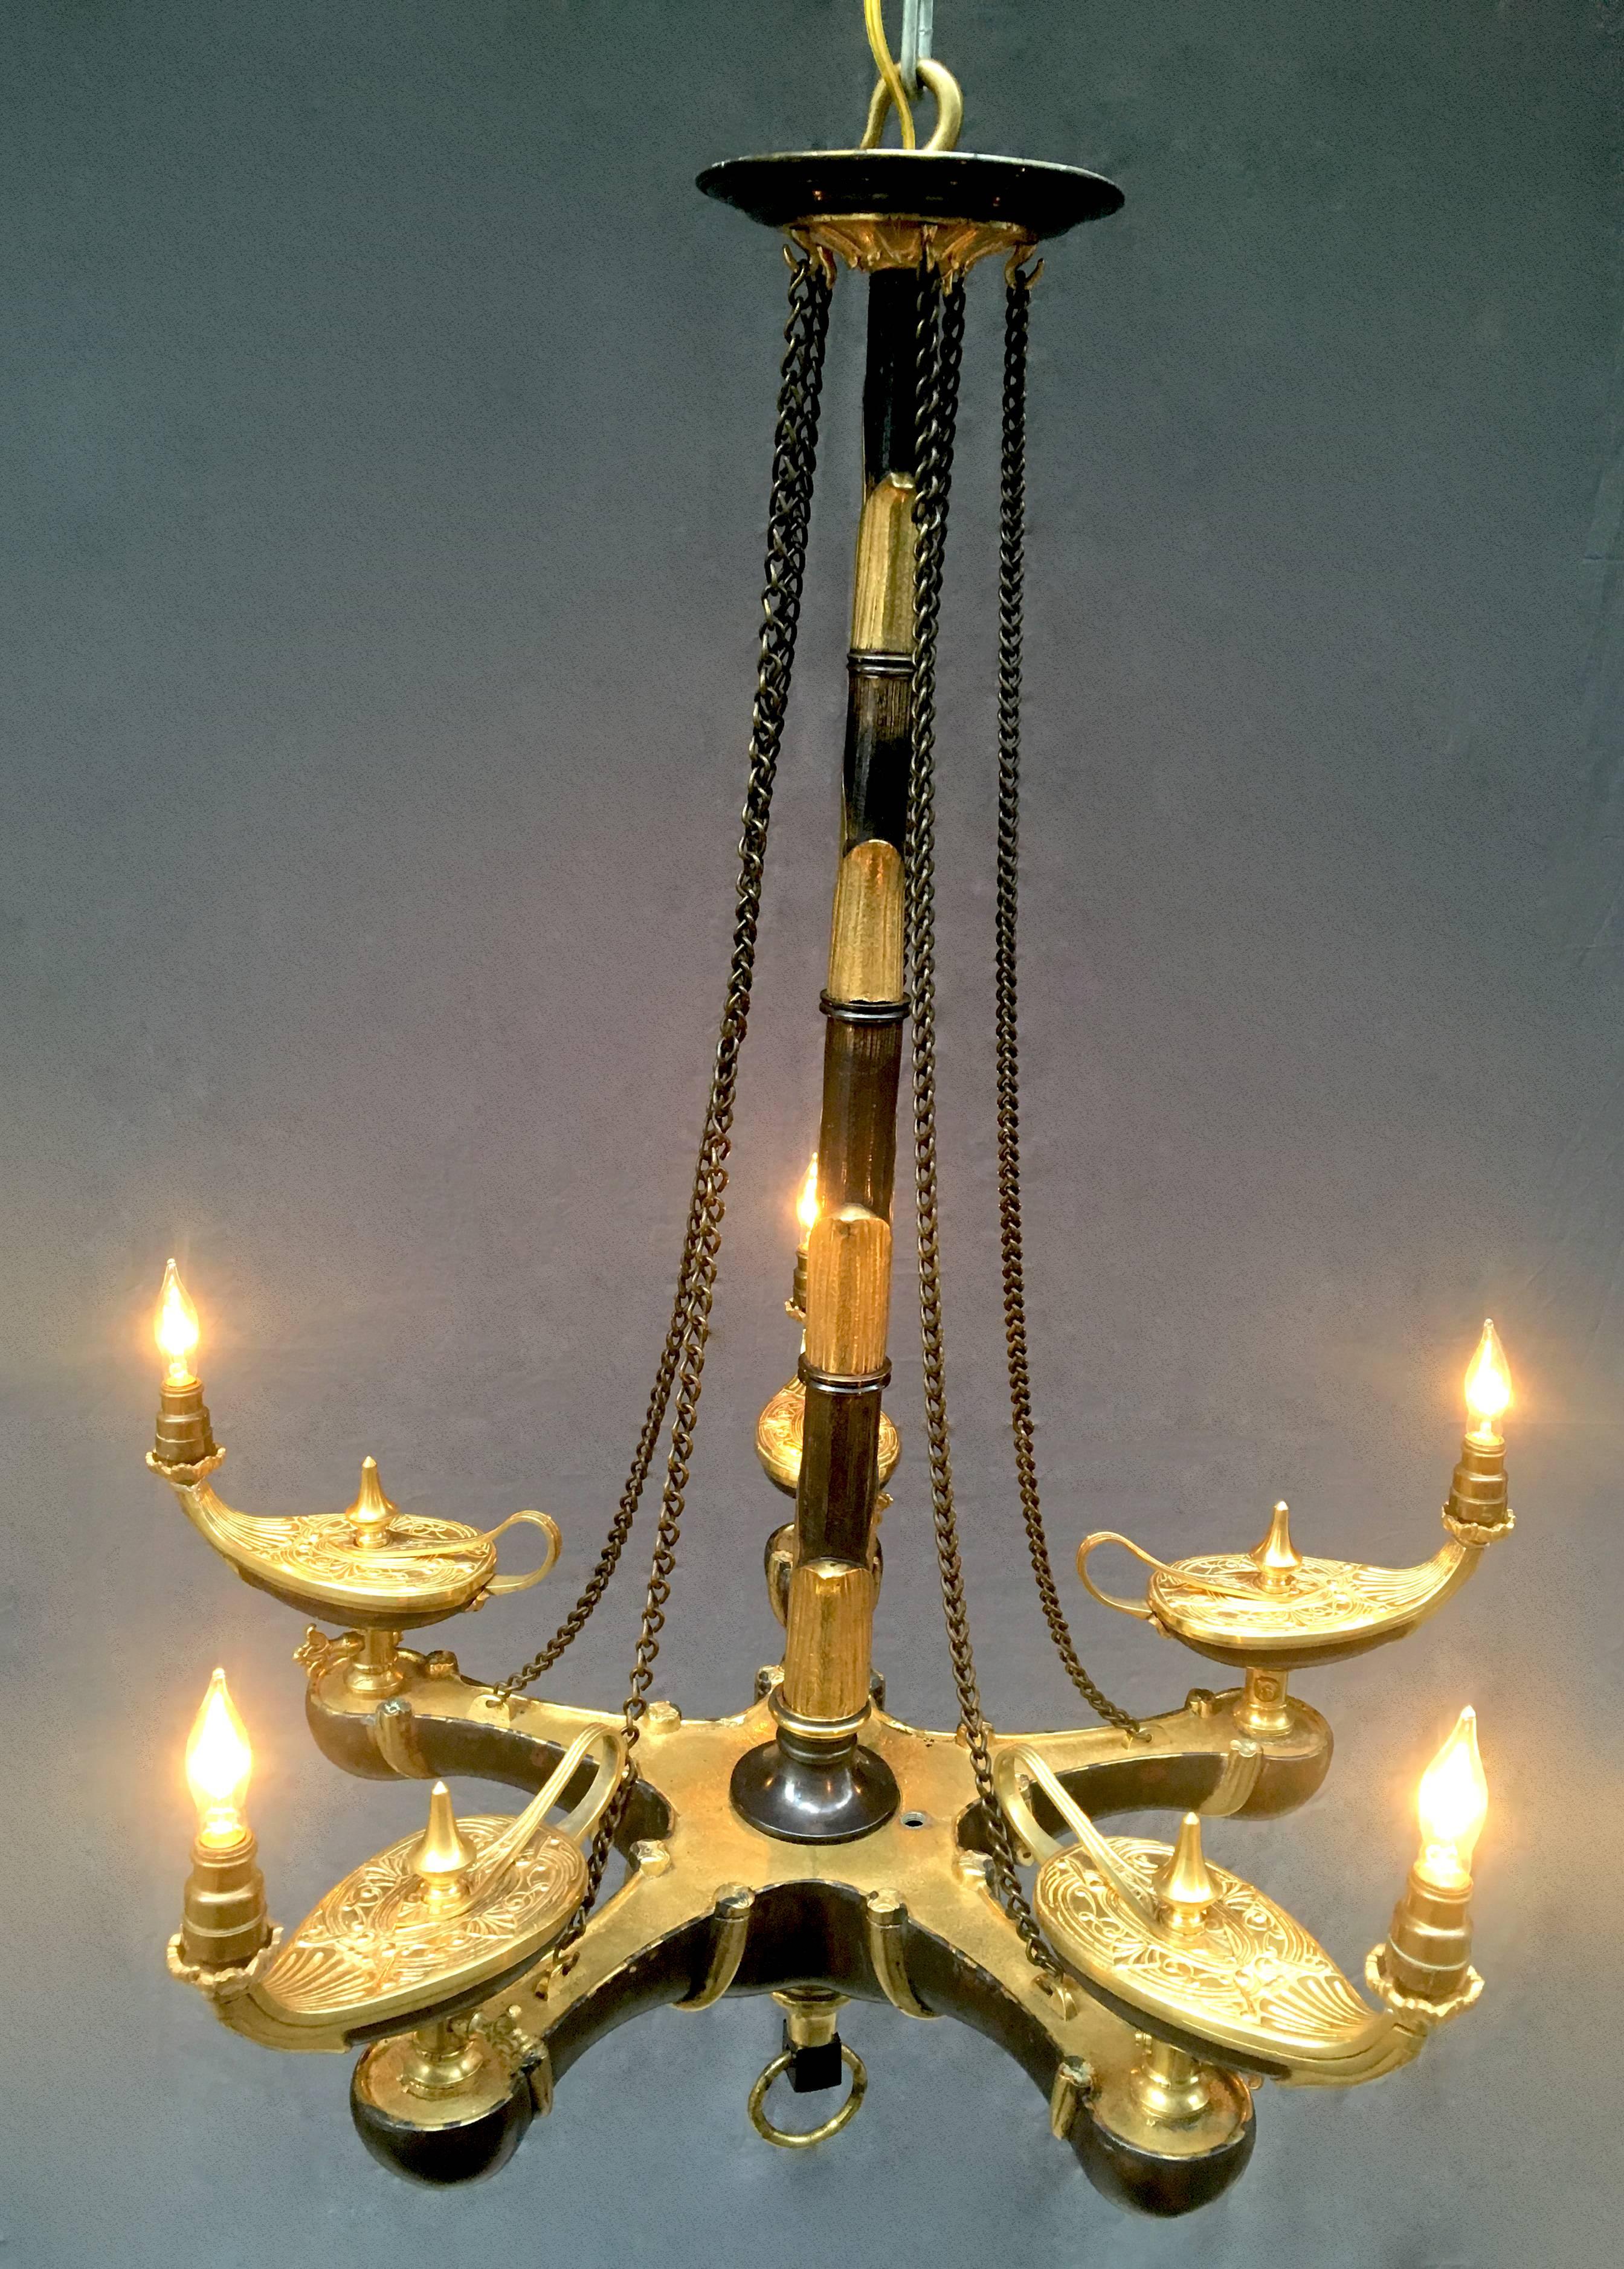 A French chandelier that was originally gas and now features five lights, circa 1840. In the French Moroccan style, it features Aladdin burners from two-tone bronze doré.